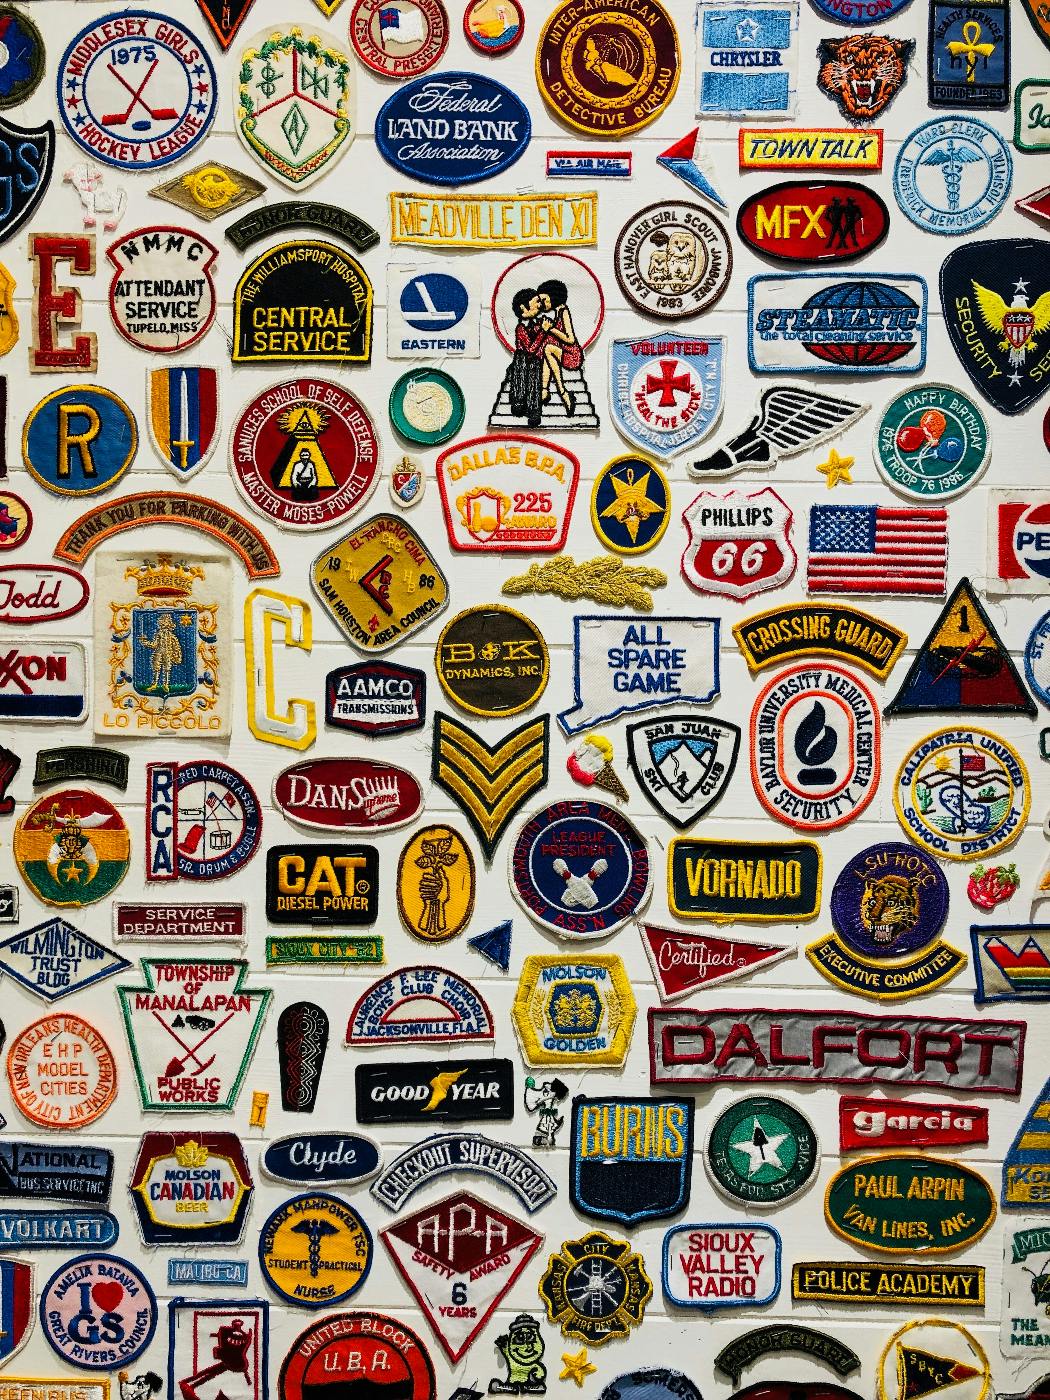 Hundreds of different patches